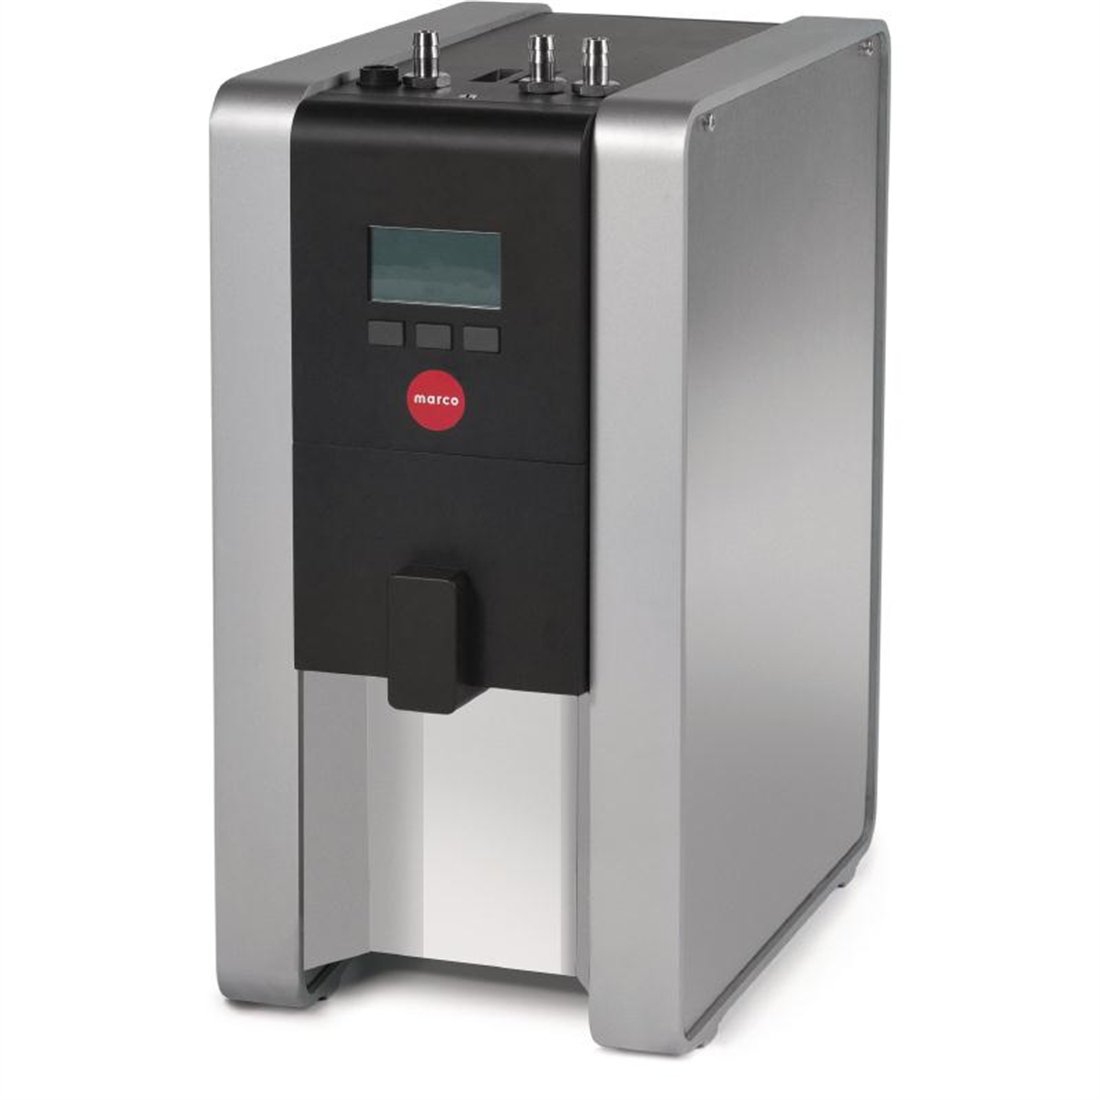 Marco 3Ltr Autofill Under Counter Water Boiler Mix UC3